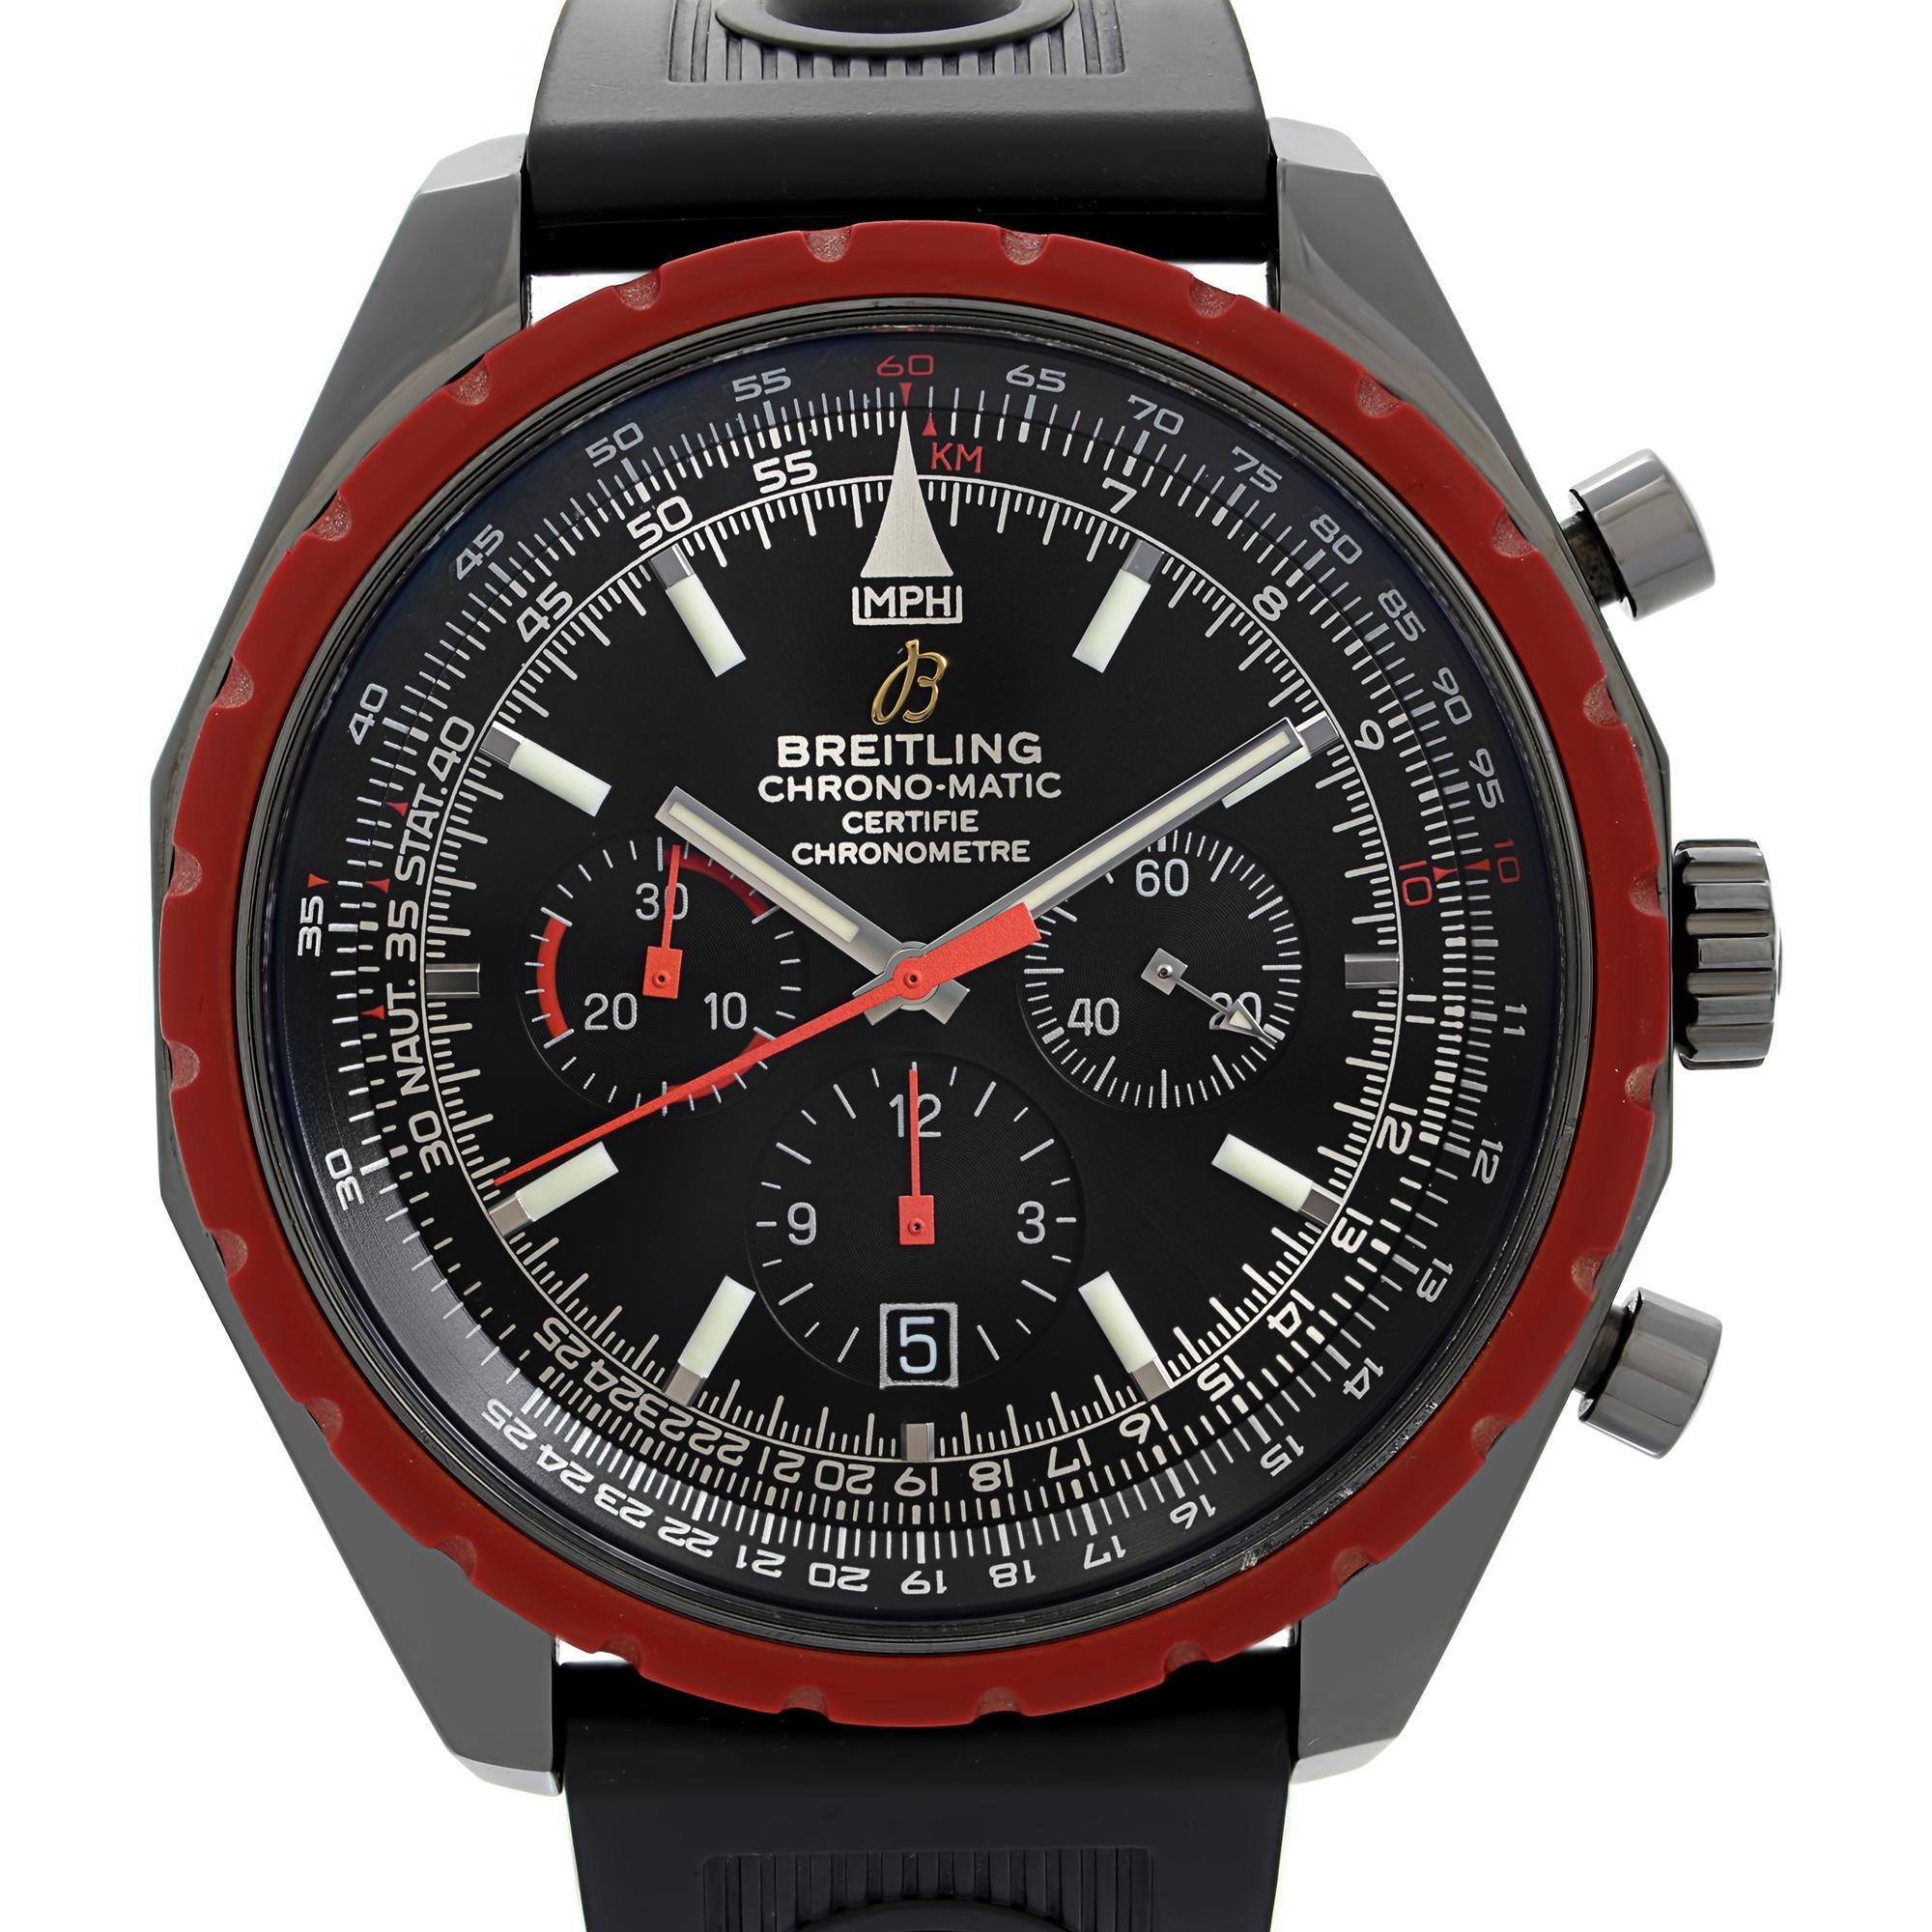 Breitling Chrono Matic 49 - For Sale on 1stDibs